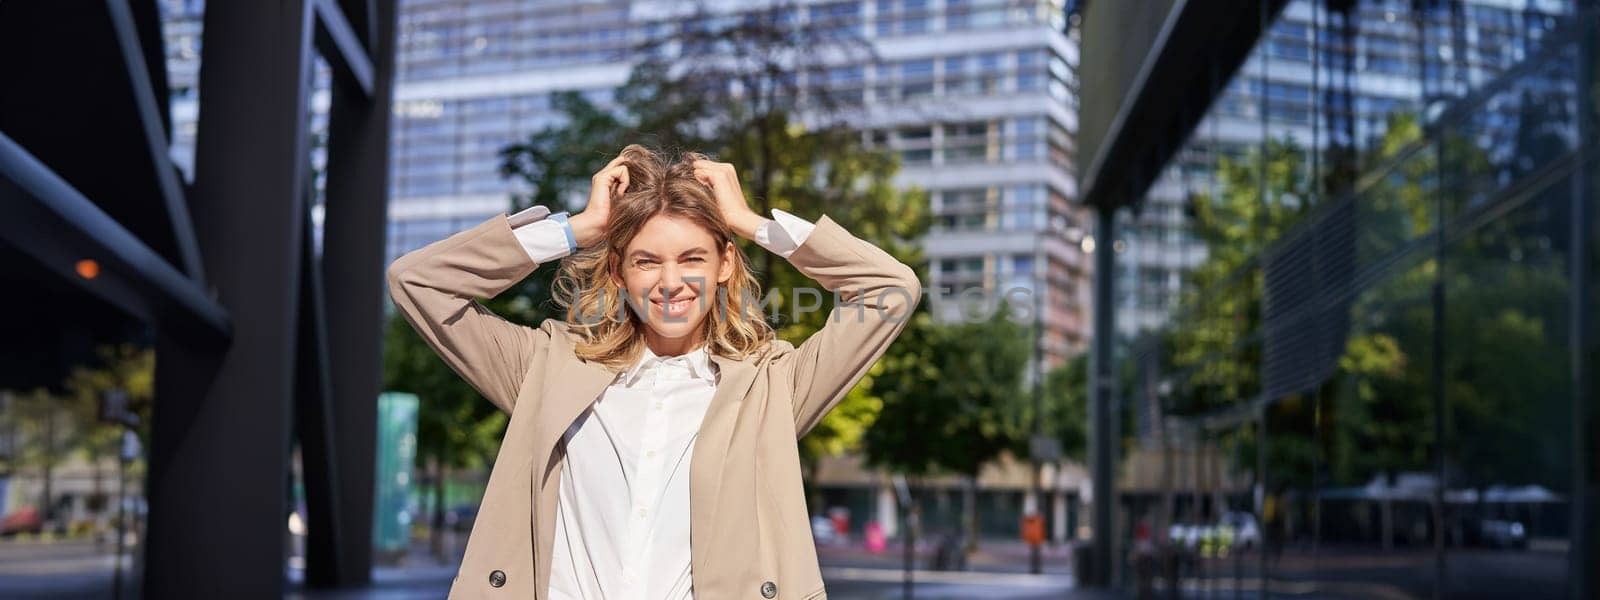 Stylish corporate woman, young lady boss in suit, looking confident and happy, posing outdoors on street. Businesswoman